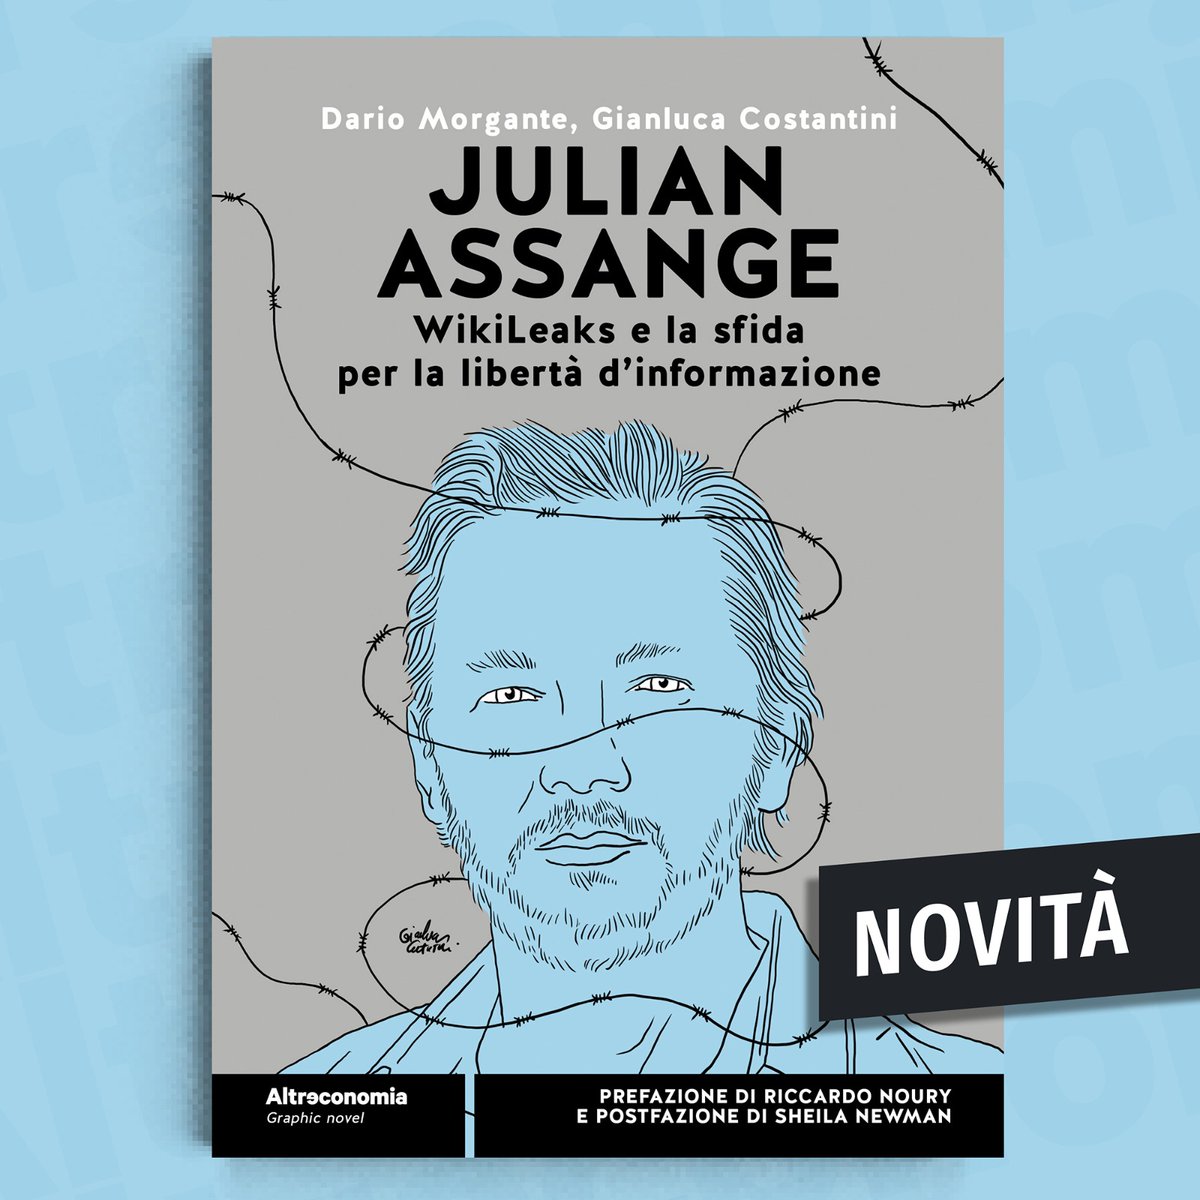 With great pleasure, and also a bit of emotion, today on the International Day of Press Freedom proclaimed by the United Nations @UN, @altreconomia, an Italian publishing house, has sent to print the graphic novel 'Julian Assange. @Wikileaks and the challenge for freedom of